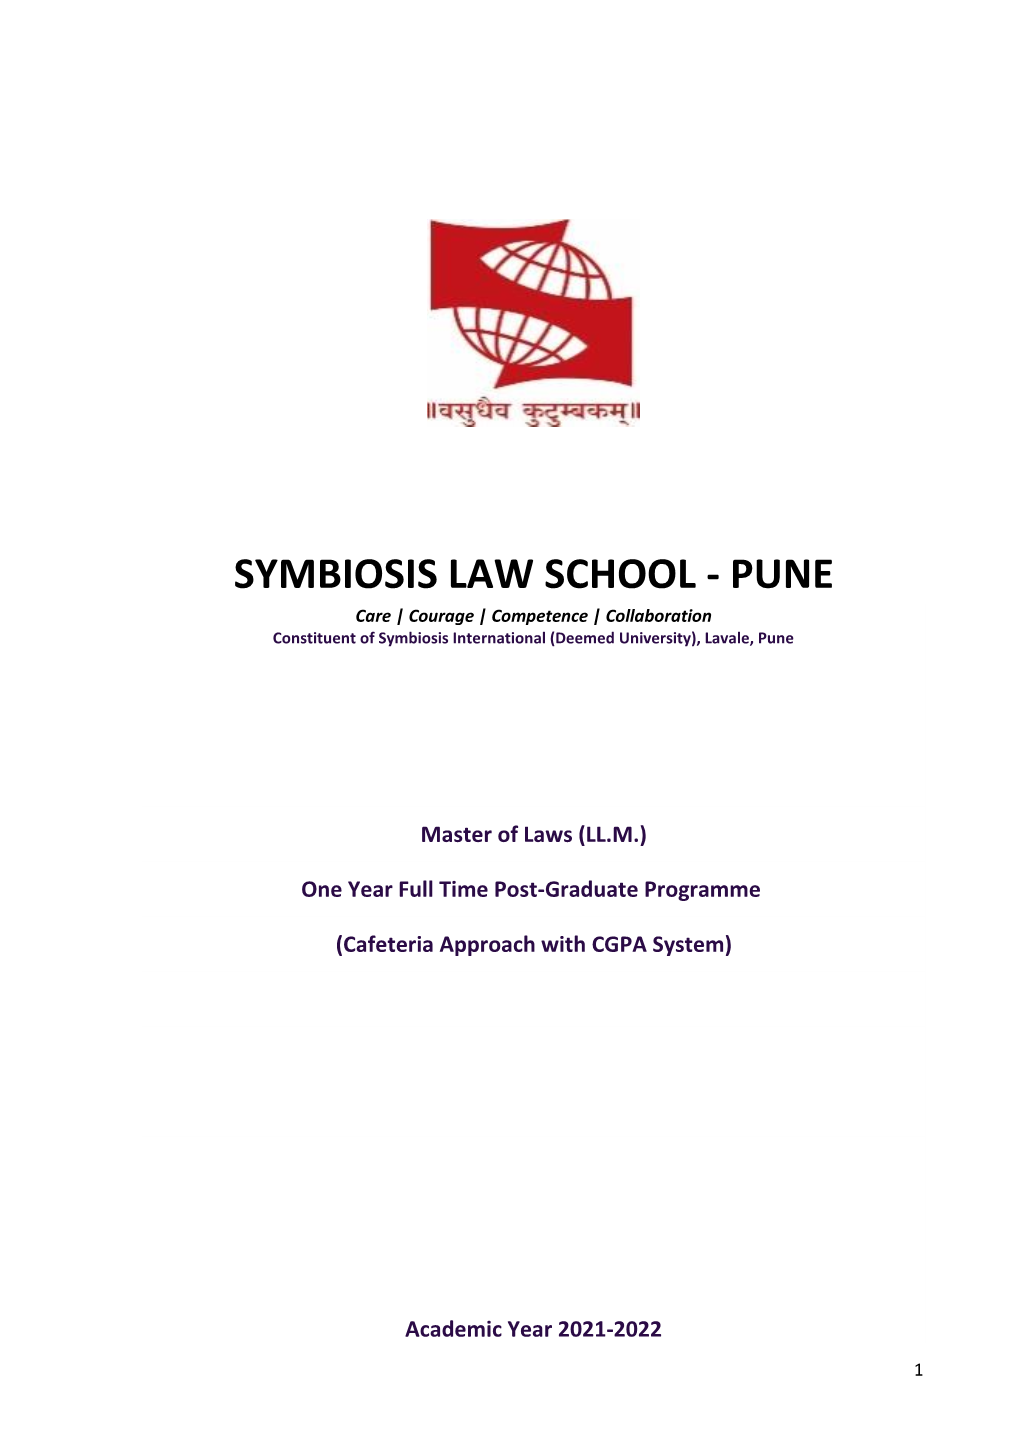 PUNE Care | Courage | Competence | Collaboration Constituent of Symbiosis International (Deemed University), Lavale, Pune